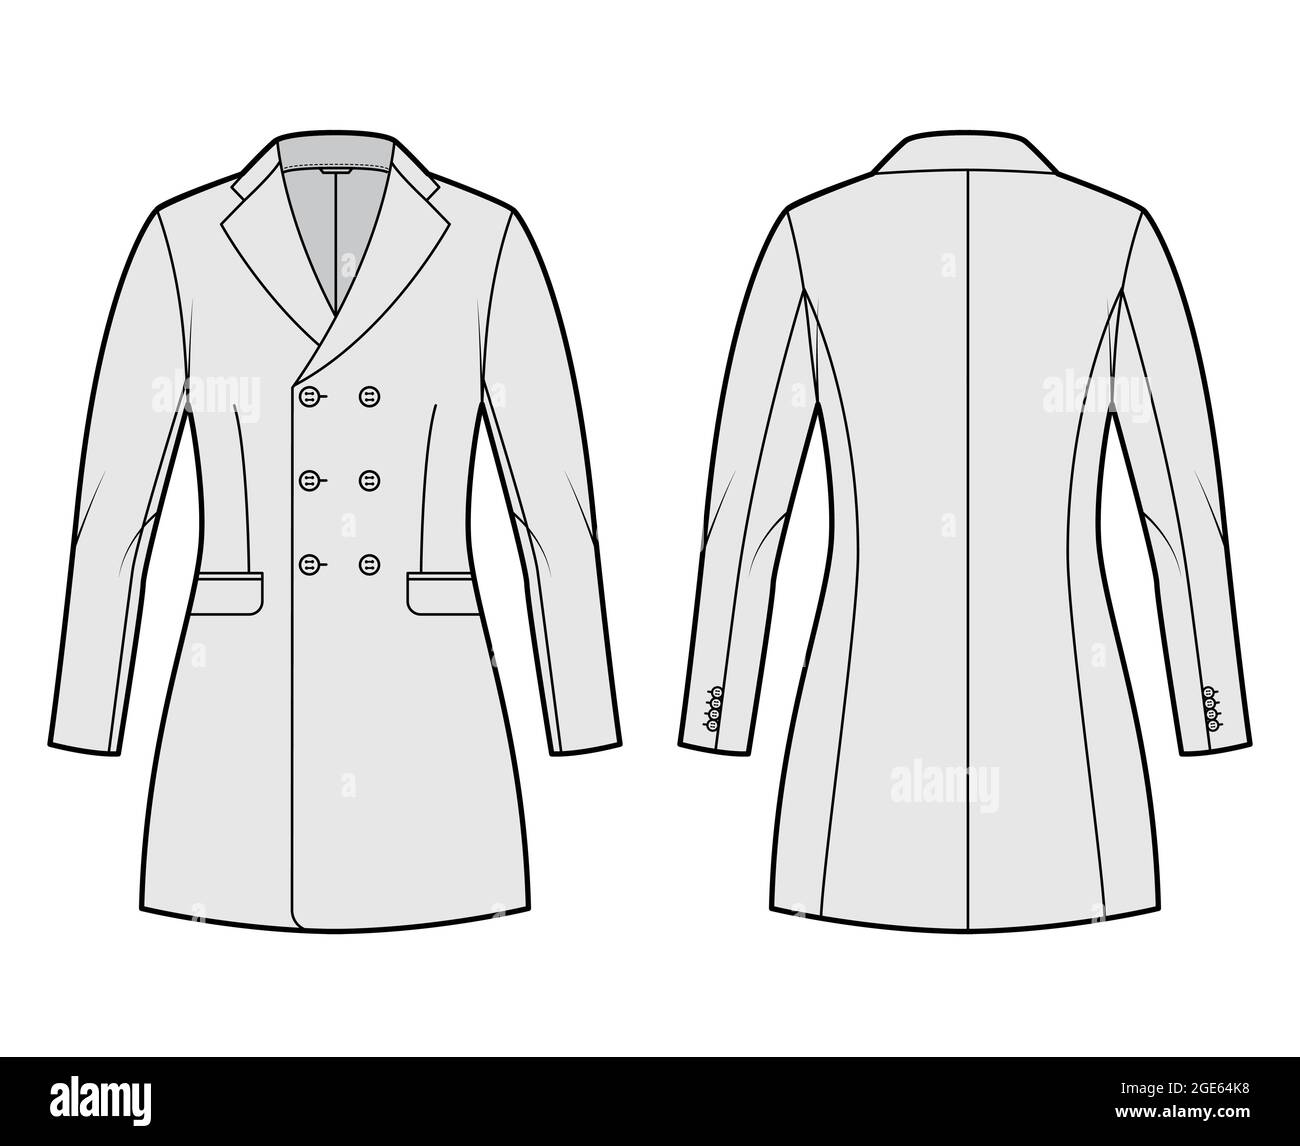 Fitted jacket double breasted suit technical fashion illustration with long sleeves, notched lapel collar, flap pockets, fingertip length. Flat Blazer template front, back, grey color. Women, men CAD Stock Vector